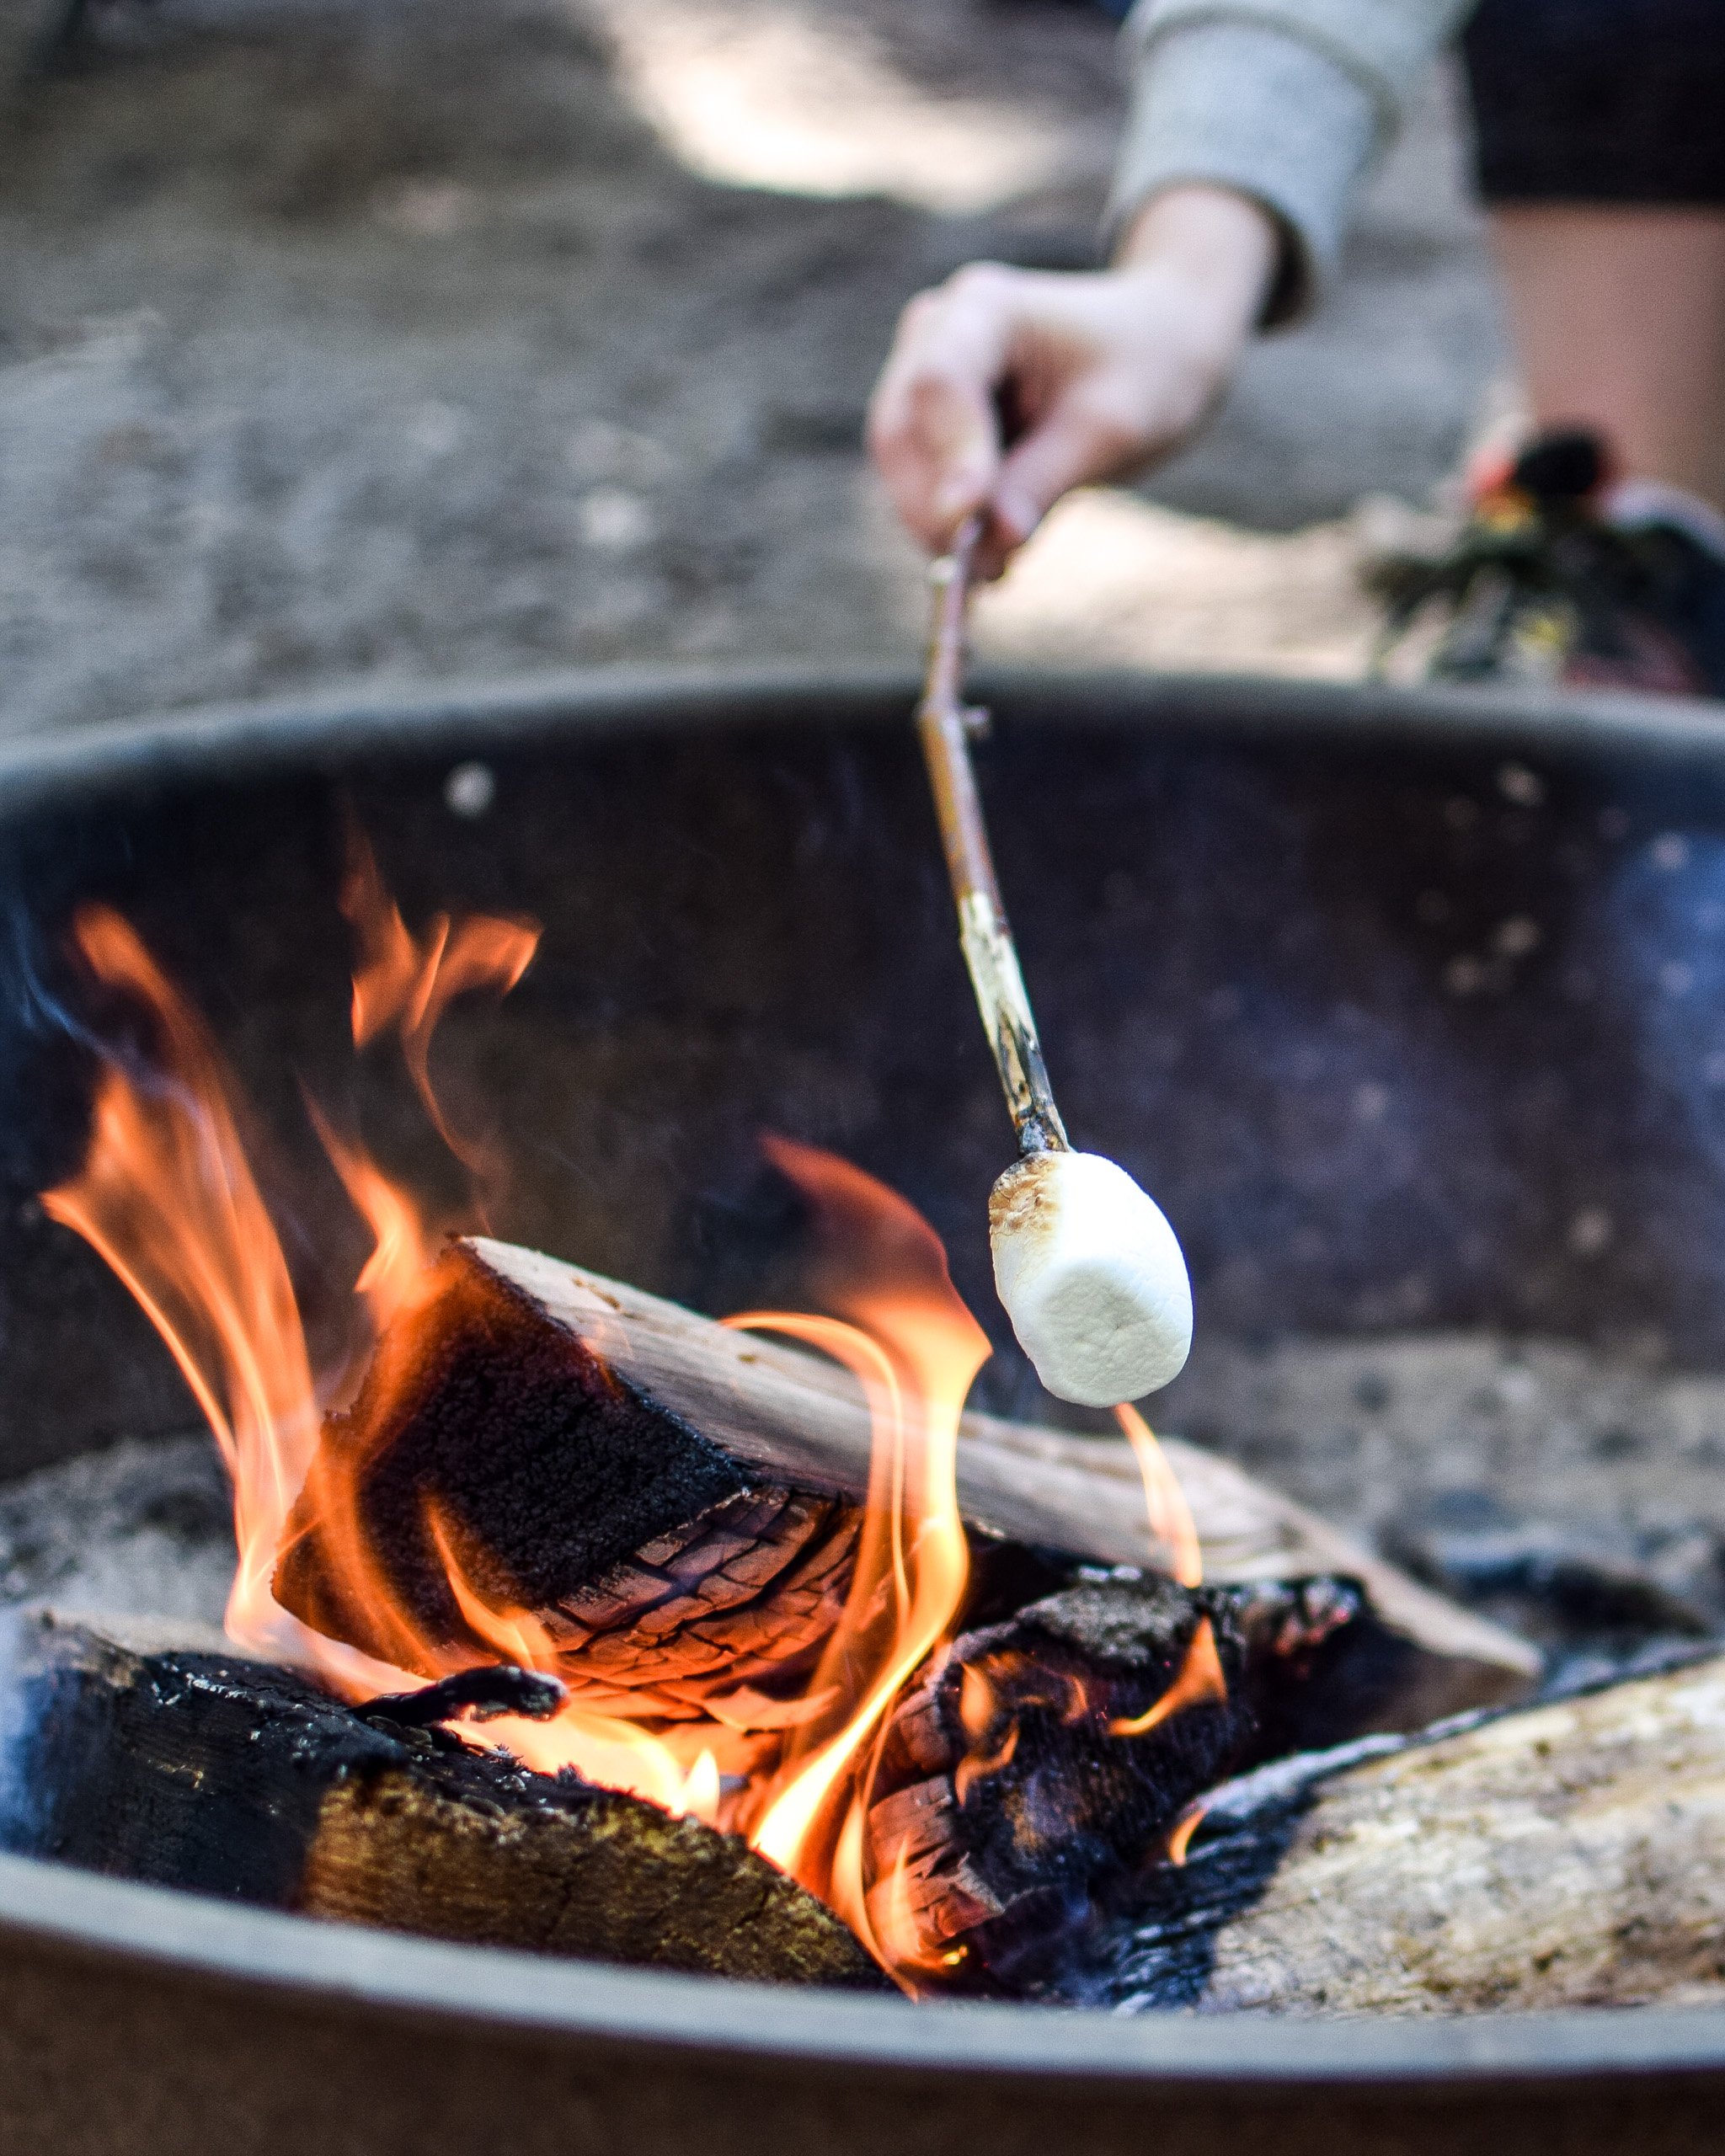 Roasting a marshmallow over a campfire.